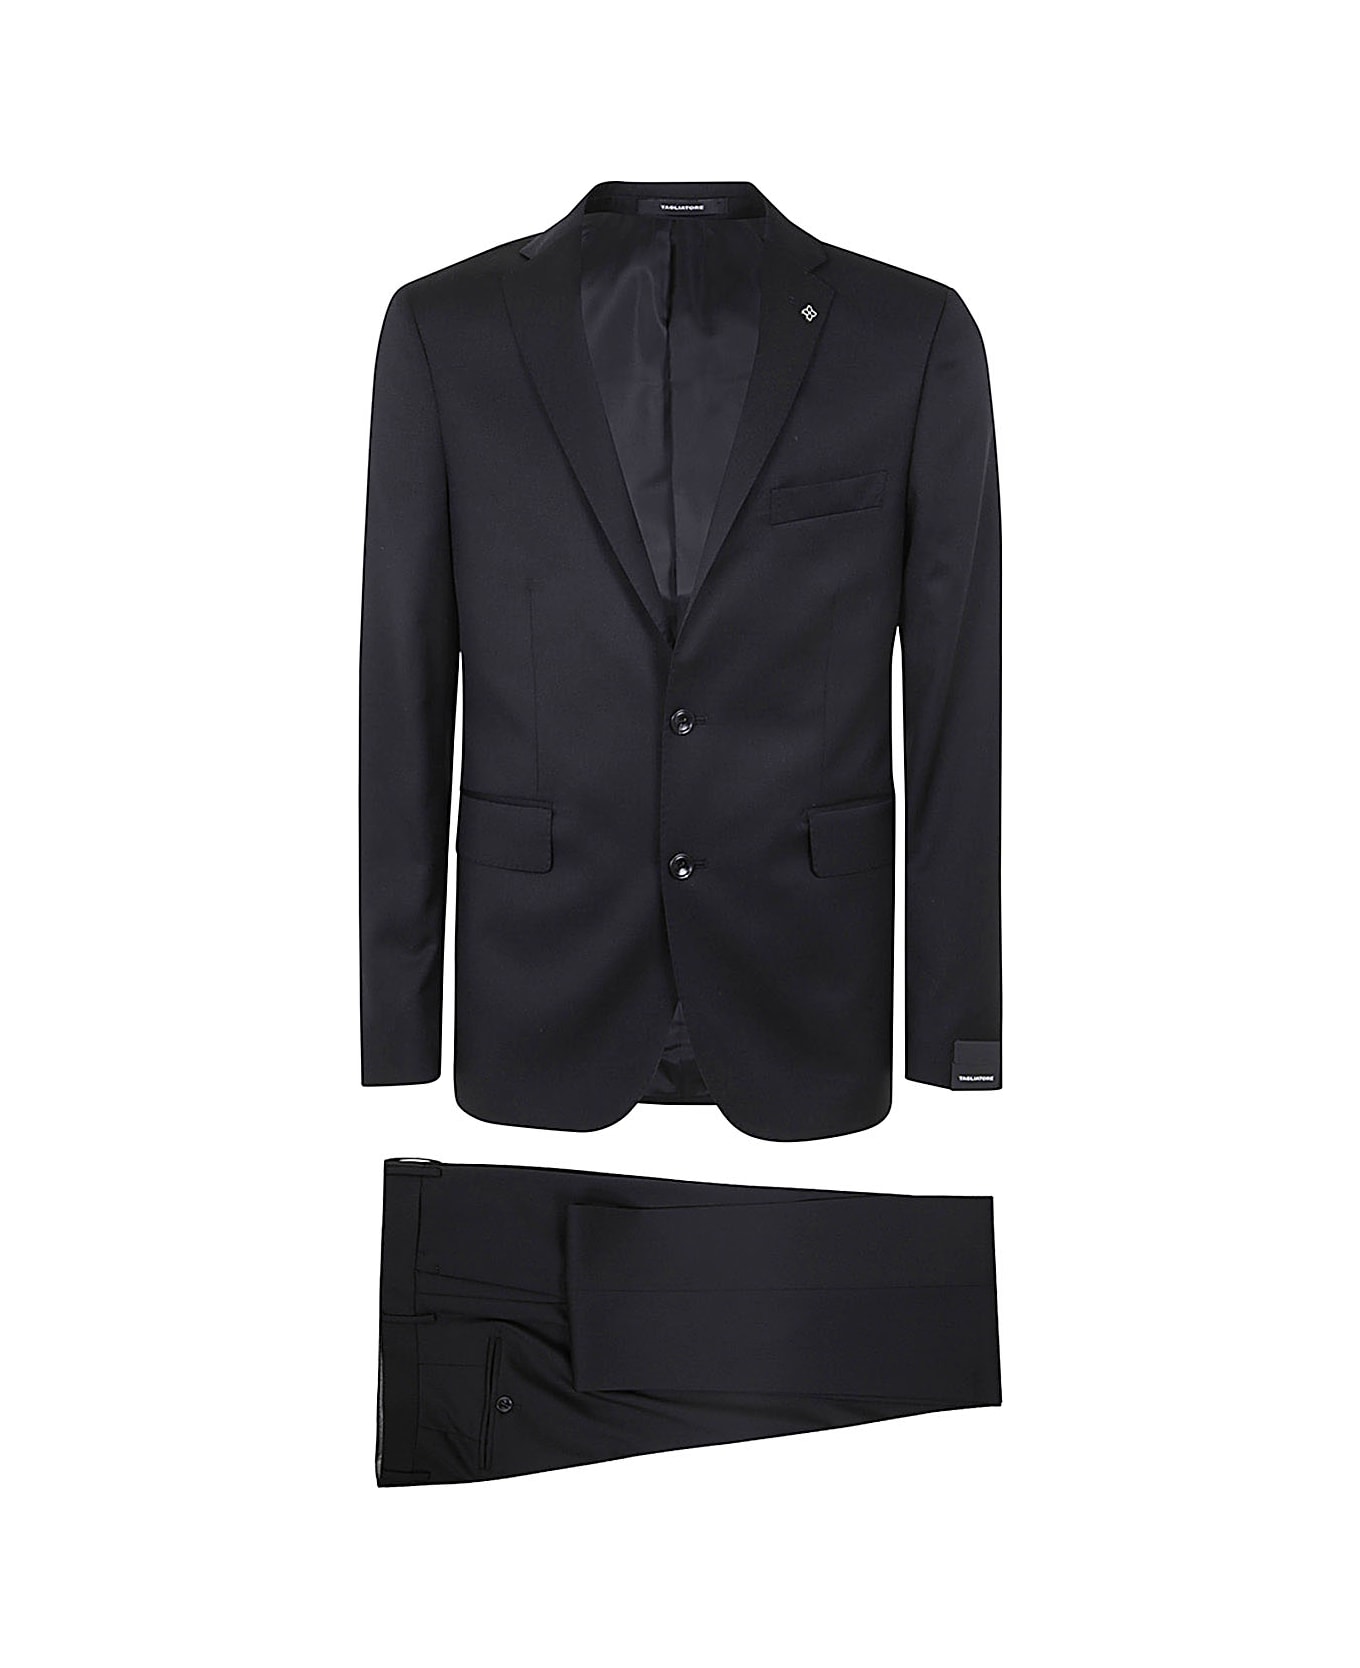 Tagliatore Classic Suit With Constructed Shoulder - Black